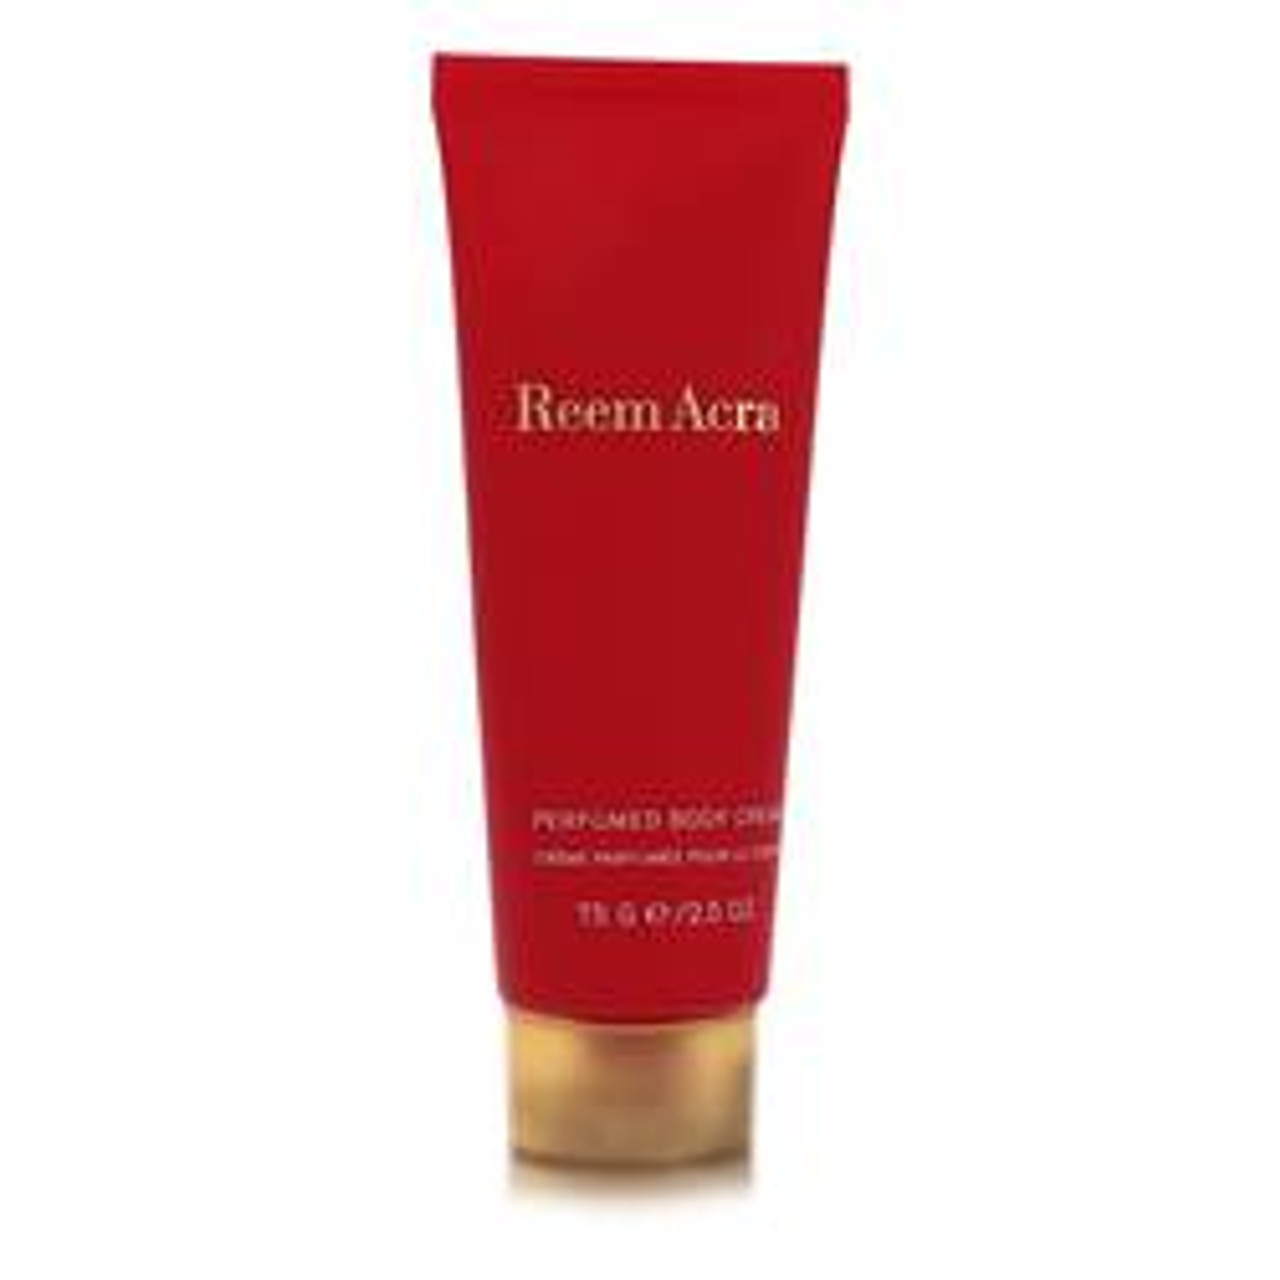 Reem Acra Perfume By Reem Acra Body Cream 2.5 oz for Women - [From 15.00 - Choose pk Qty ] - *Ships from Miami